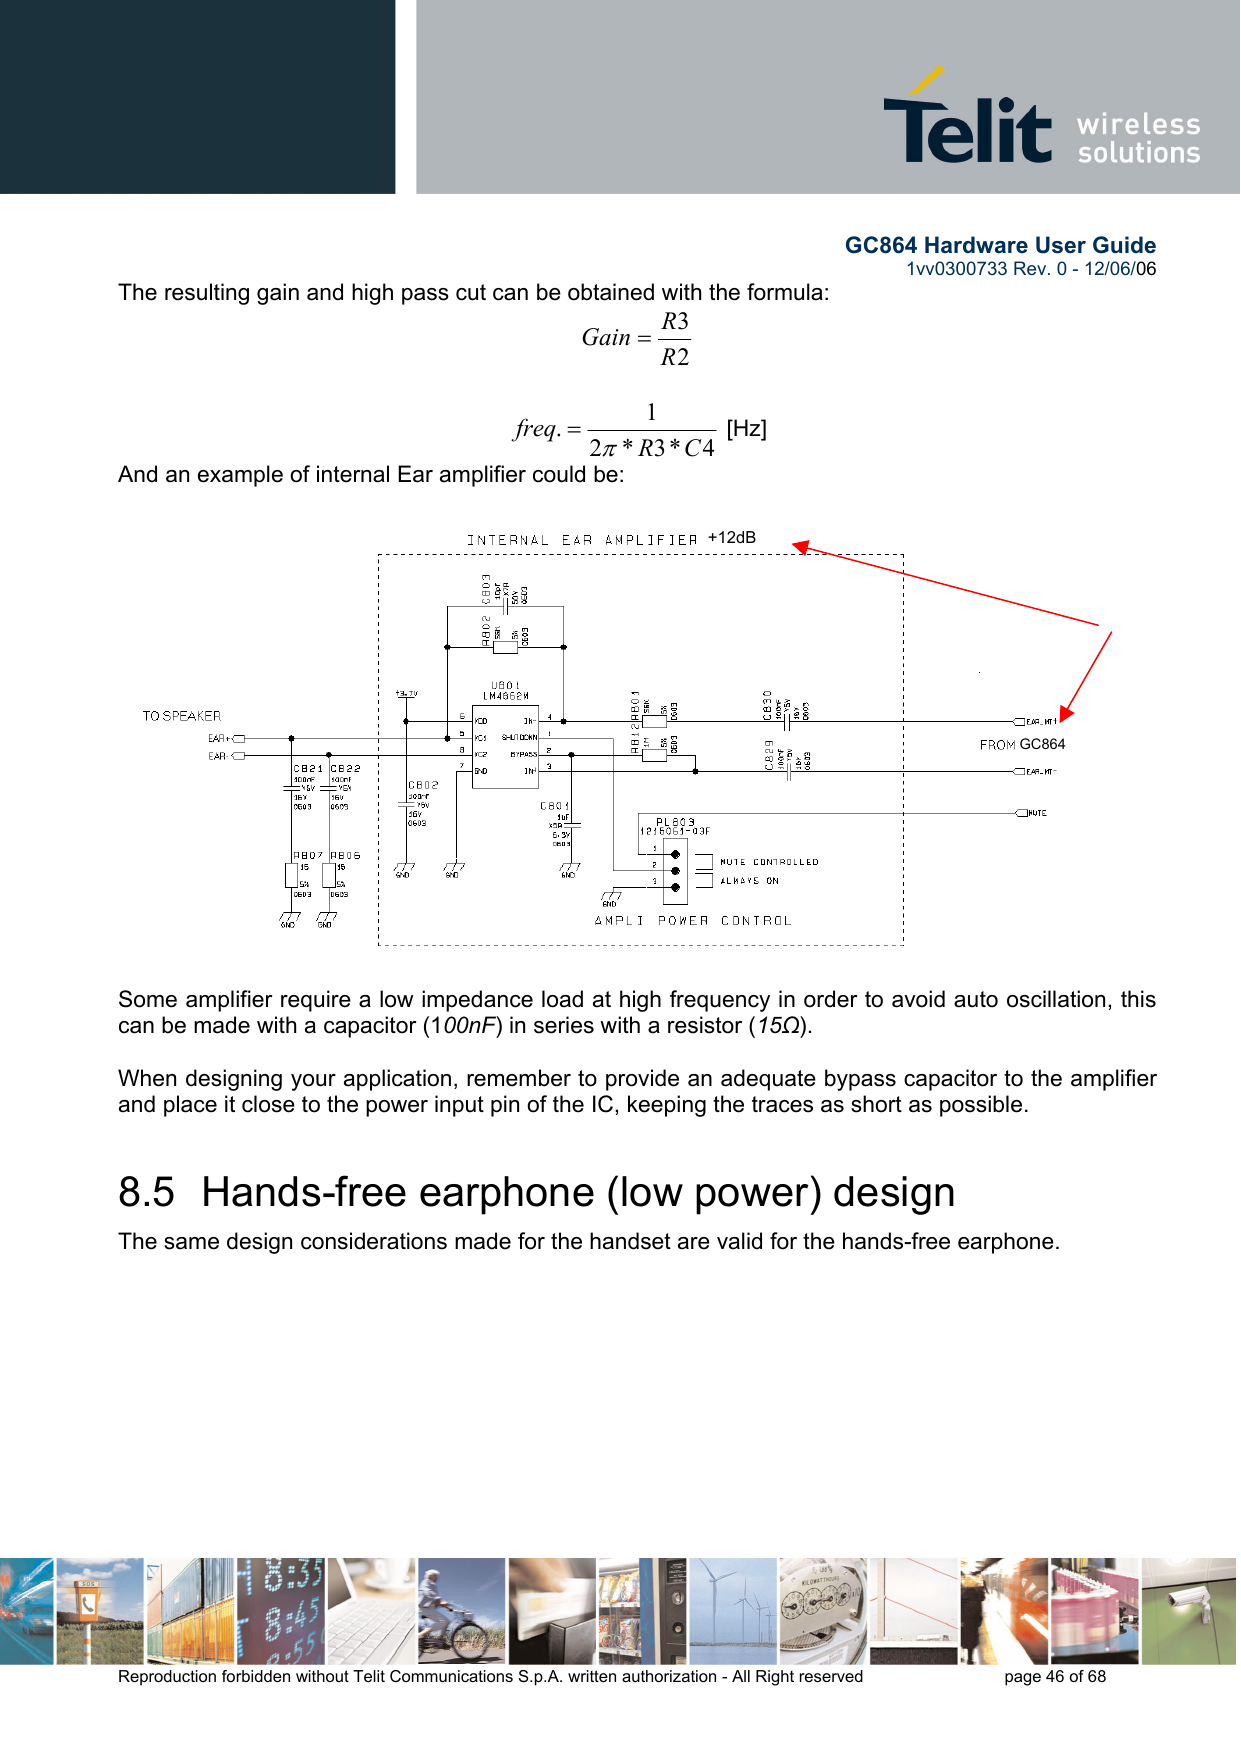        GC864 Hardware User Guide  1vv0300733 Rev. 0 - 12/06/06  Reproduction forbidden without Telit Communications S.p.A. written authorization - All Right reserved    page 46 of 68  The resulting gain and high pass cut can be obtained with the formula: 23RRGain =  4*3*21.CRfreqπ= [Hz] And an example of internal Ear amplifier could be:  Some amplifier require a low impedance load at high frequency in order to avoid auto oscillation, this can be made with a capacitor (100nF) in series with a resistor (15Ω).  When designing your application, remember to provide an adequate bypass capacitor to the amplifier and place it close to the power input pin of the IC, keeping the traces as short as possible. 8.5  Hands-free earphone (low power) design The same design considerations made for the handset are valid for the hands-free earphone. +12dBGC864